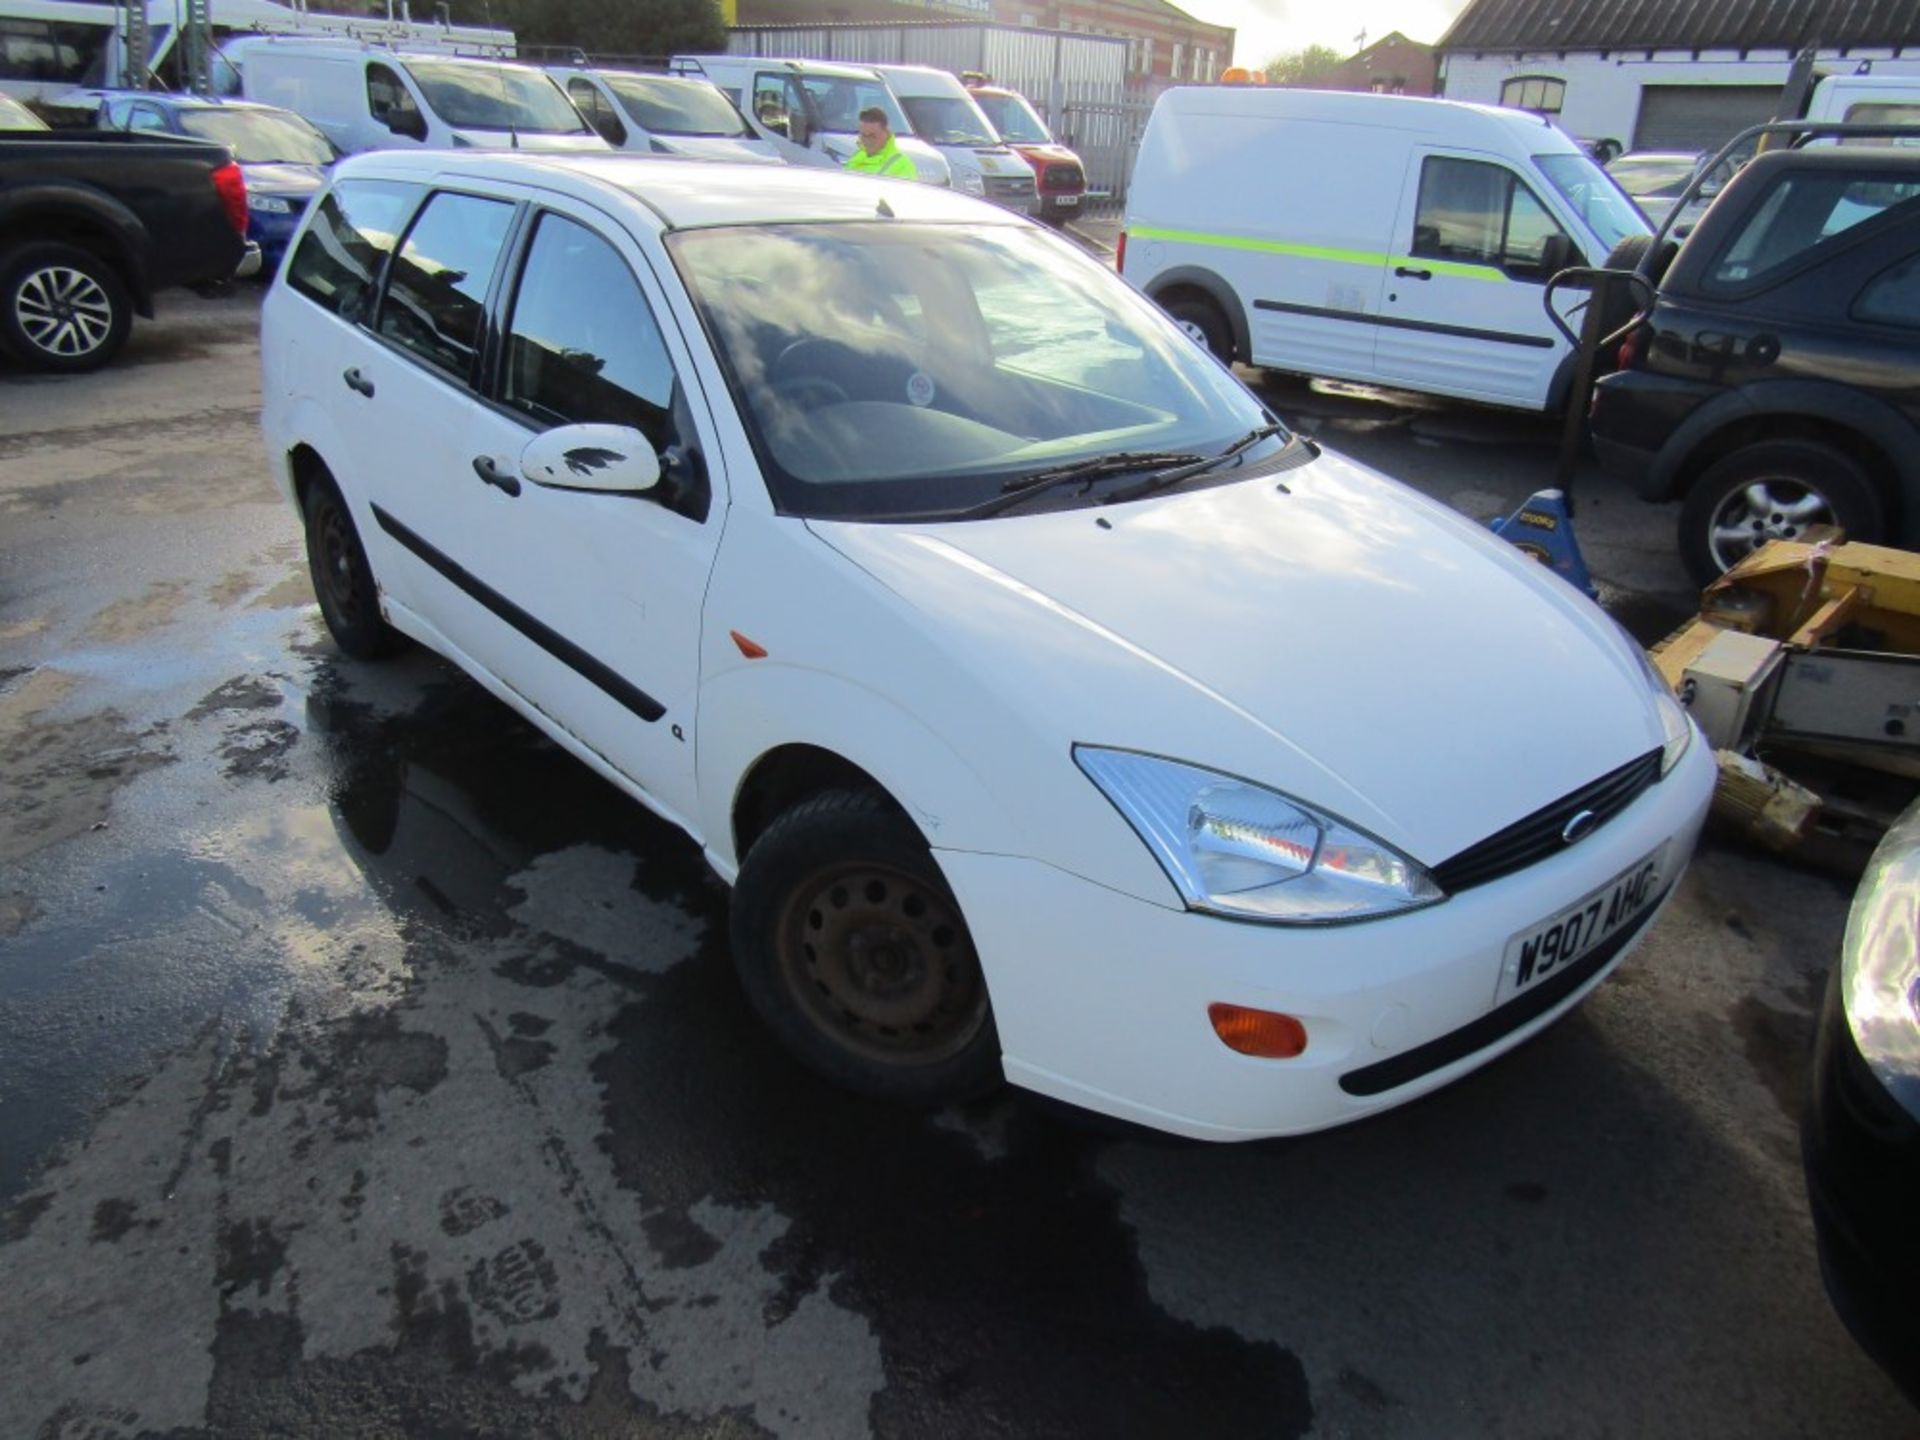 W reg FORD FOCUS CL TD DI ESTATE, 1ST REG 05/00, 145820M WARRANTED, V5 HERE, 2 FORMER KEEPERS [NO